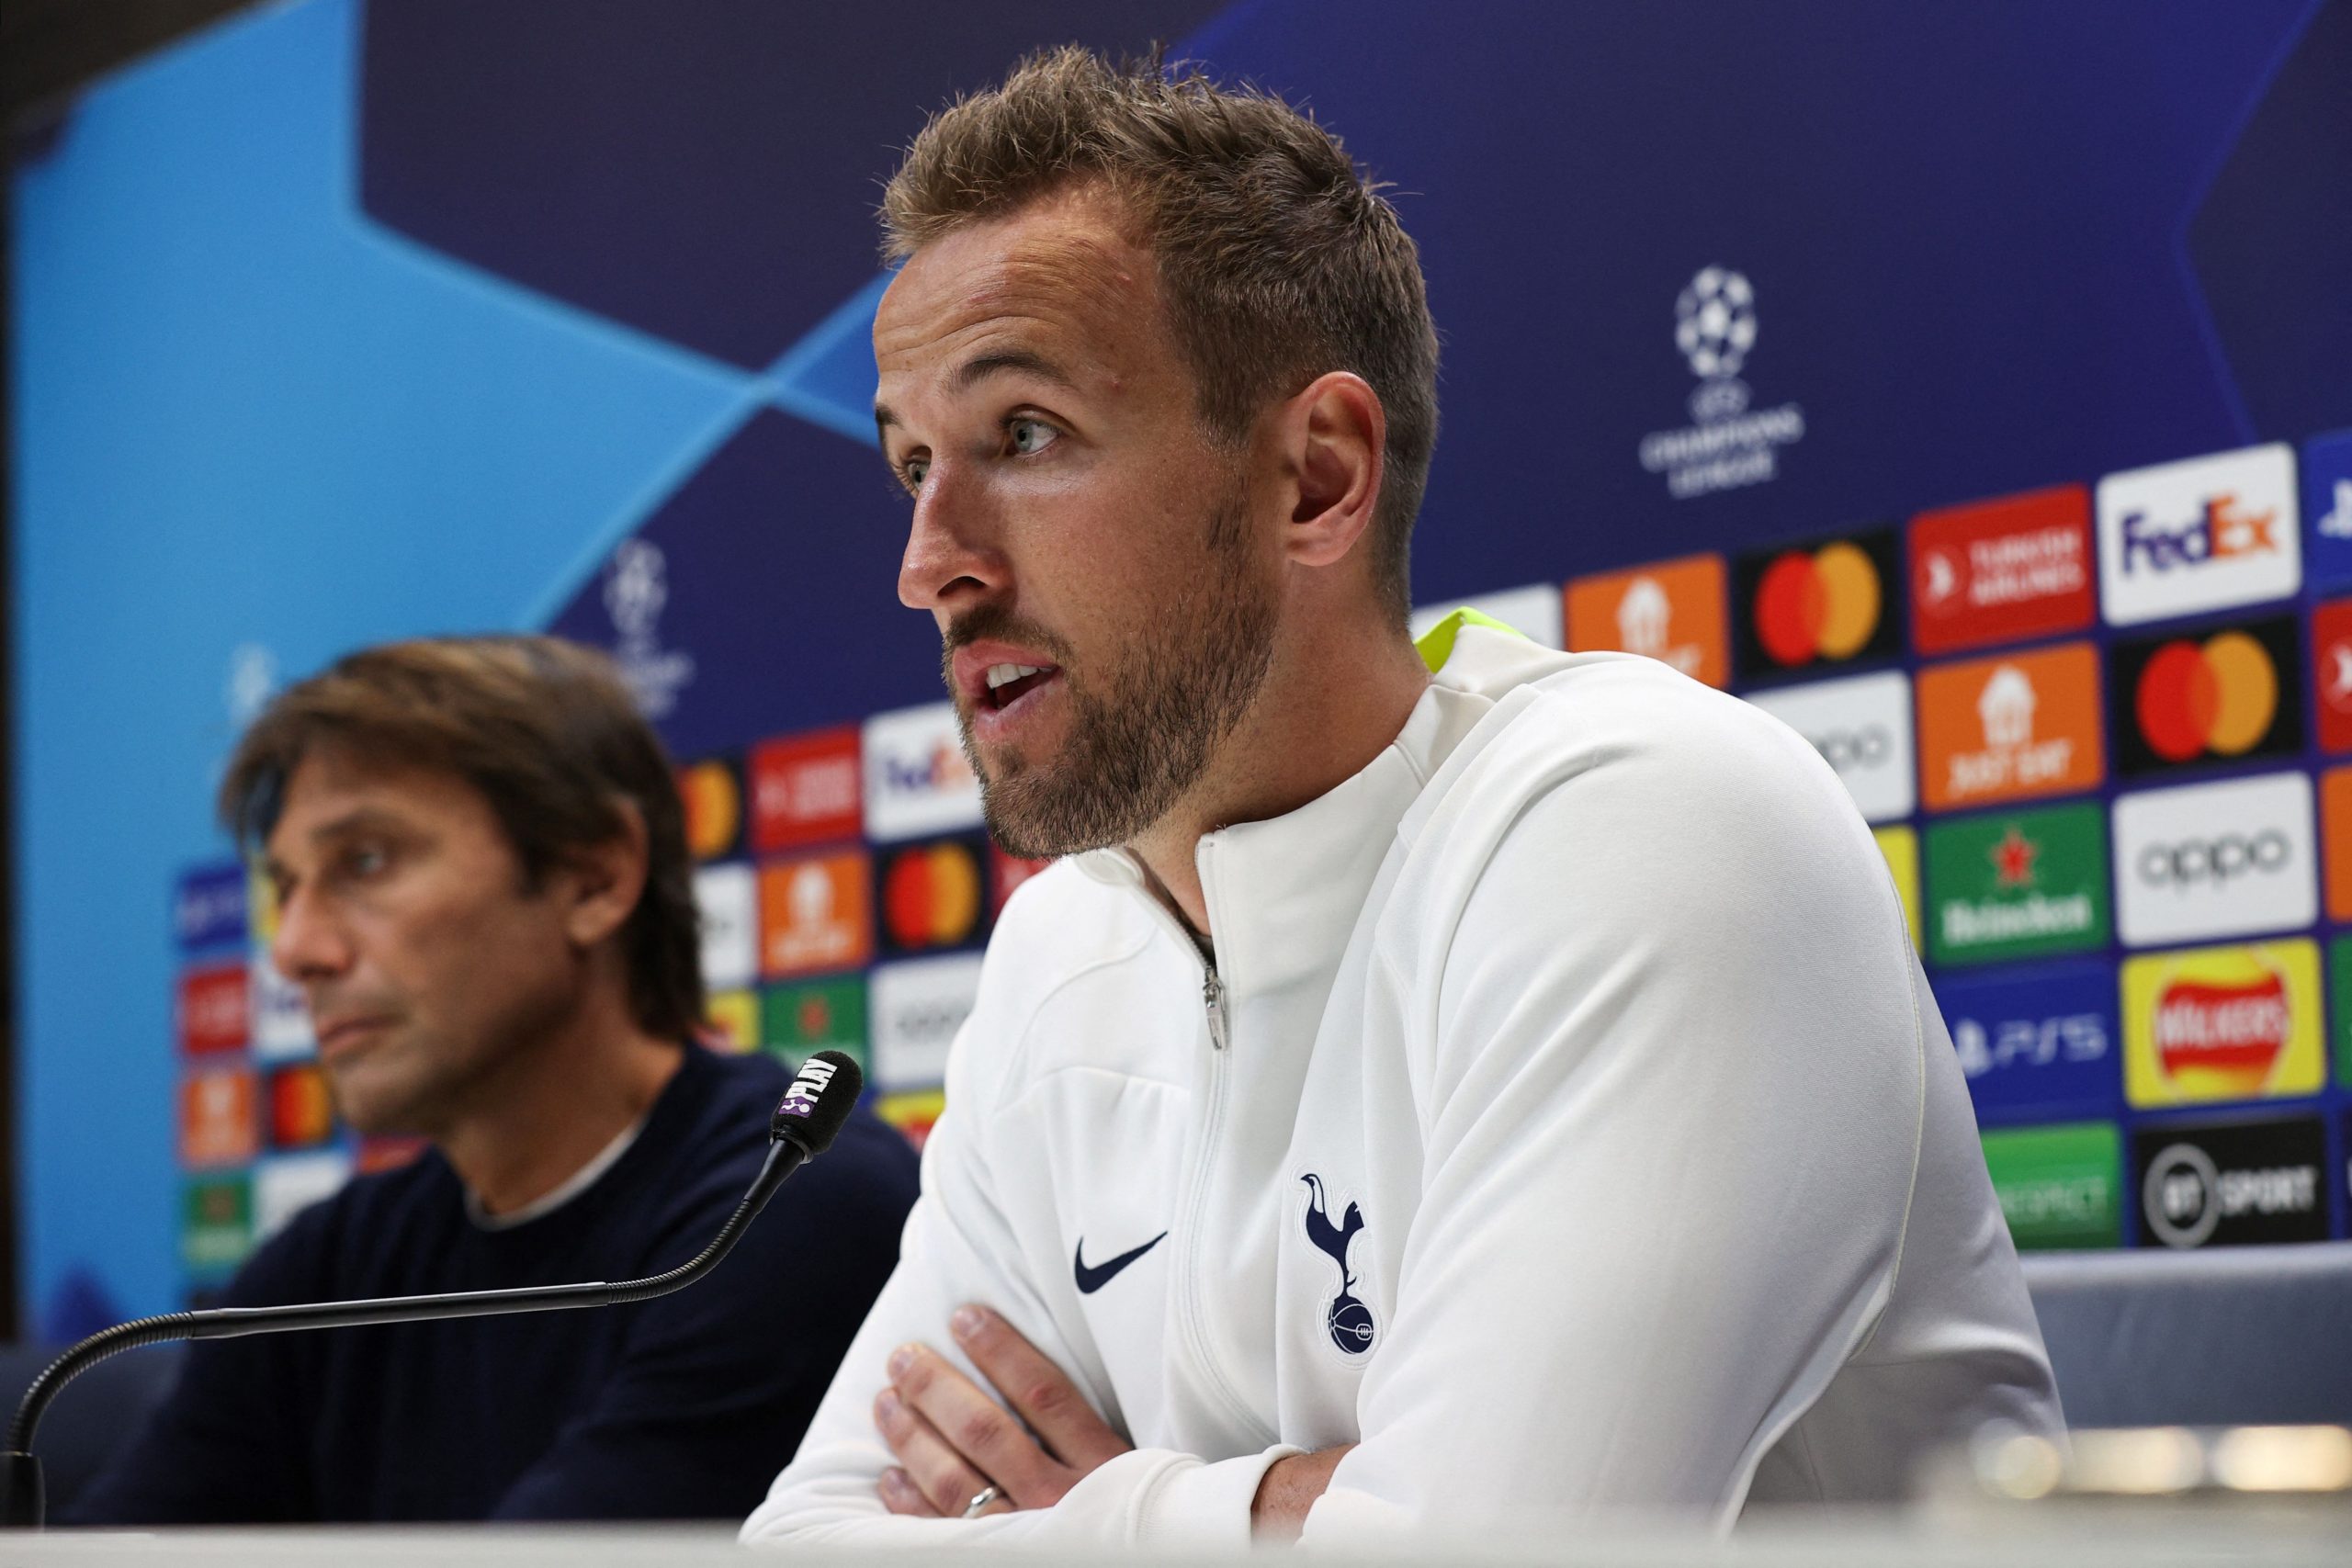 Tottenham Hotspur are ready to risk Harry Kane running down his deal rather than joining Manchester United.